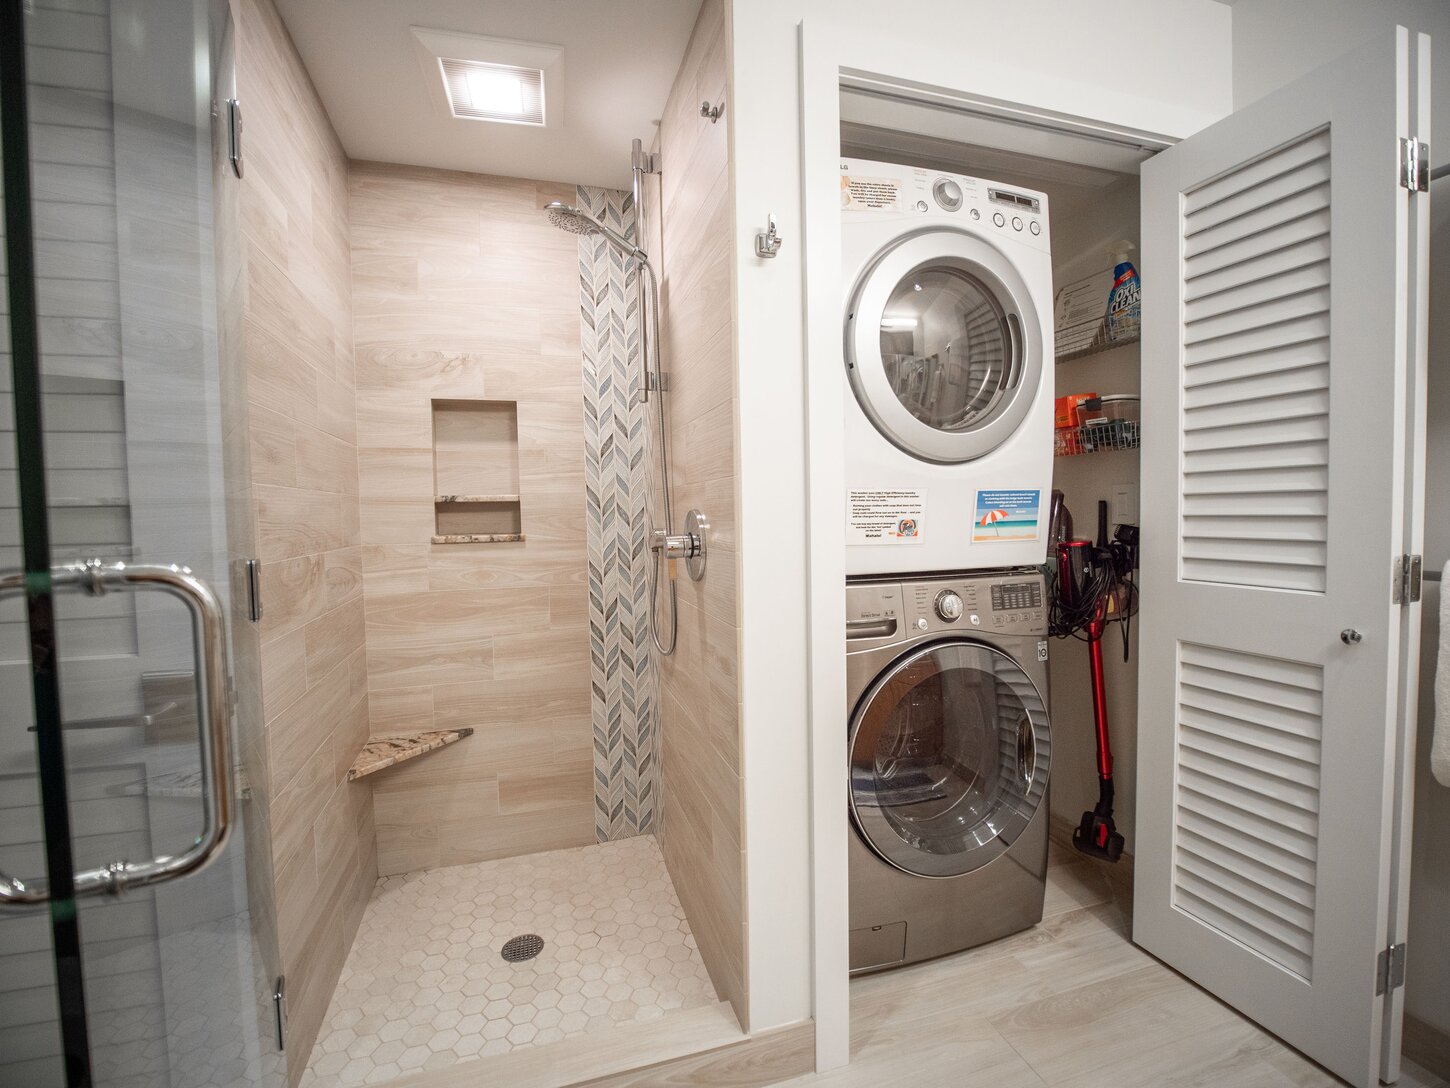 Full-size, front-loading washer and dryer for your use!